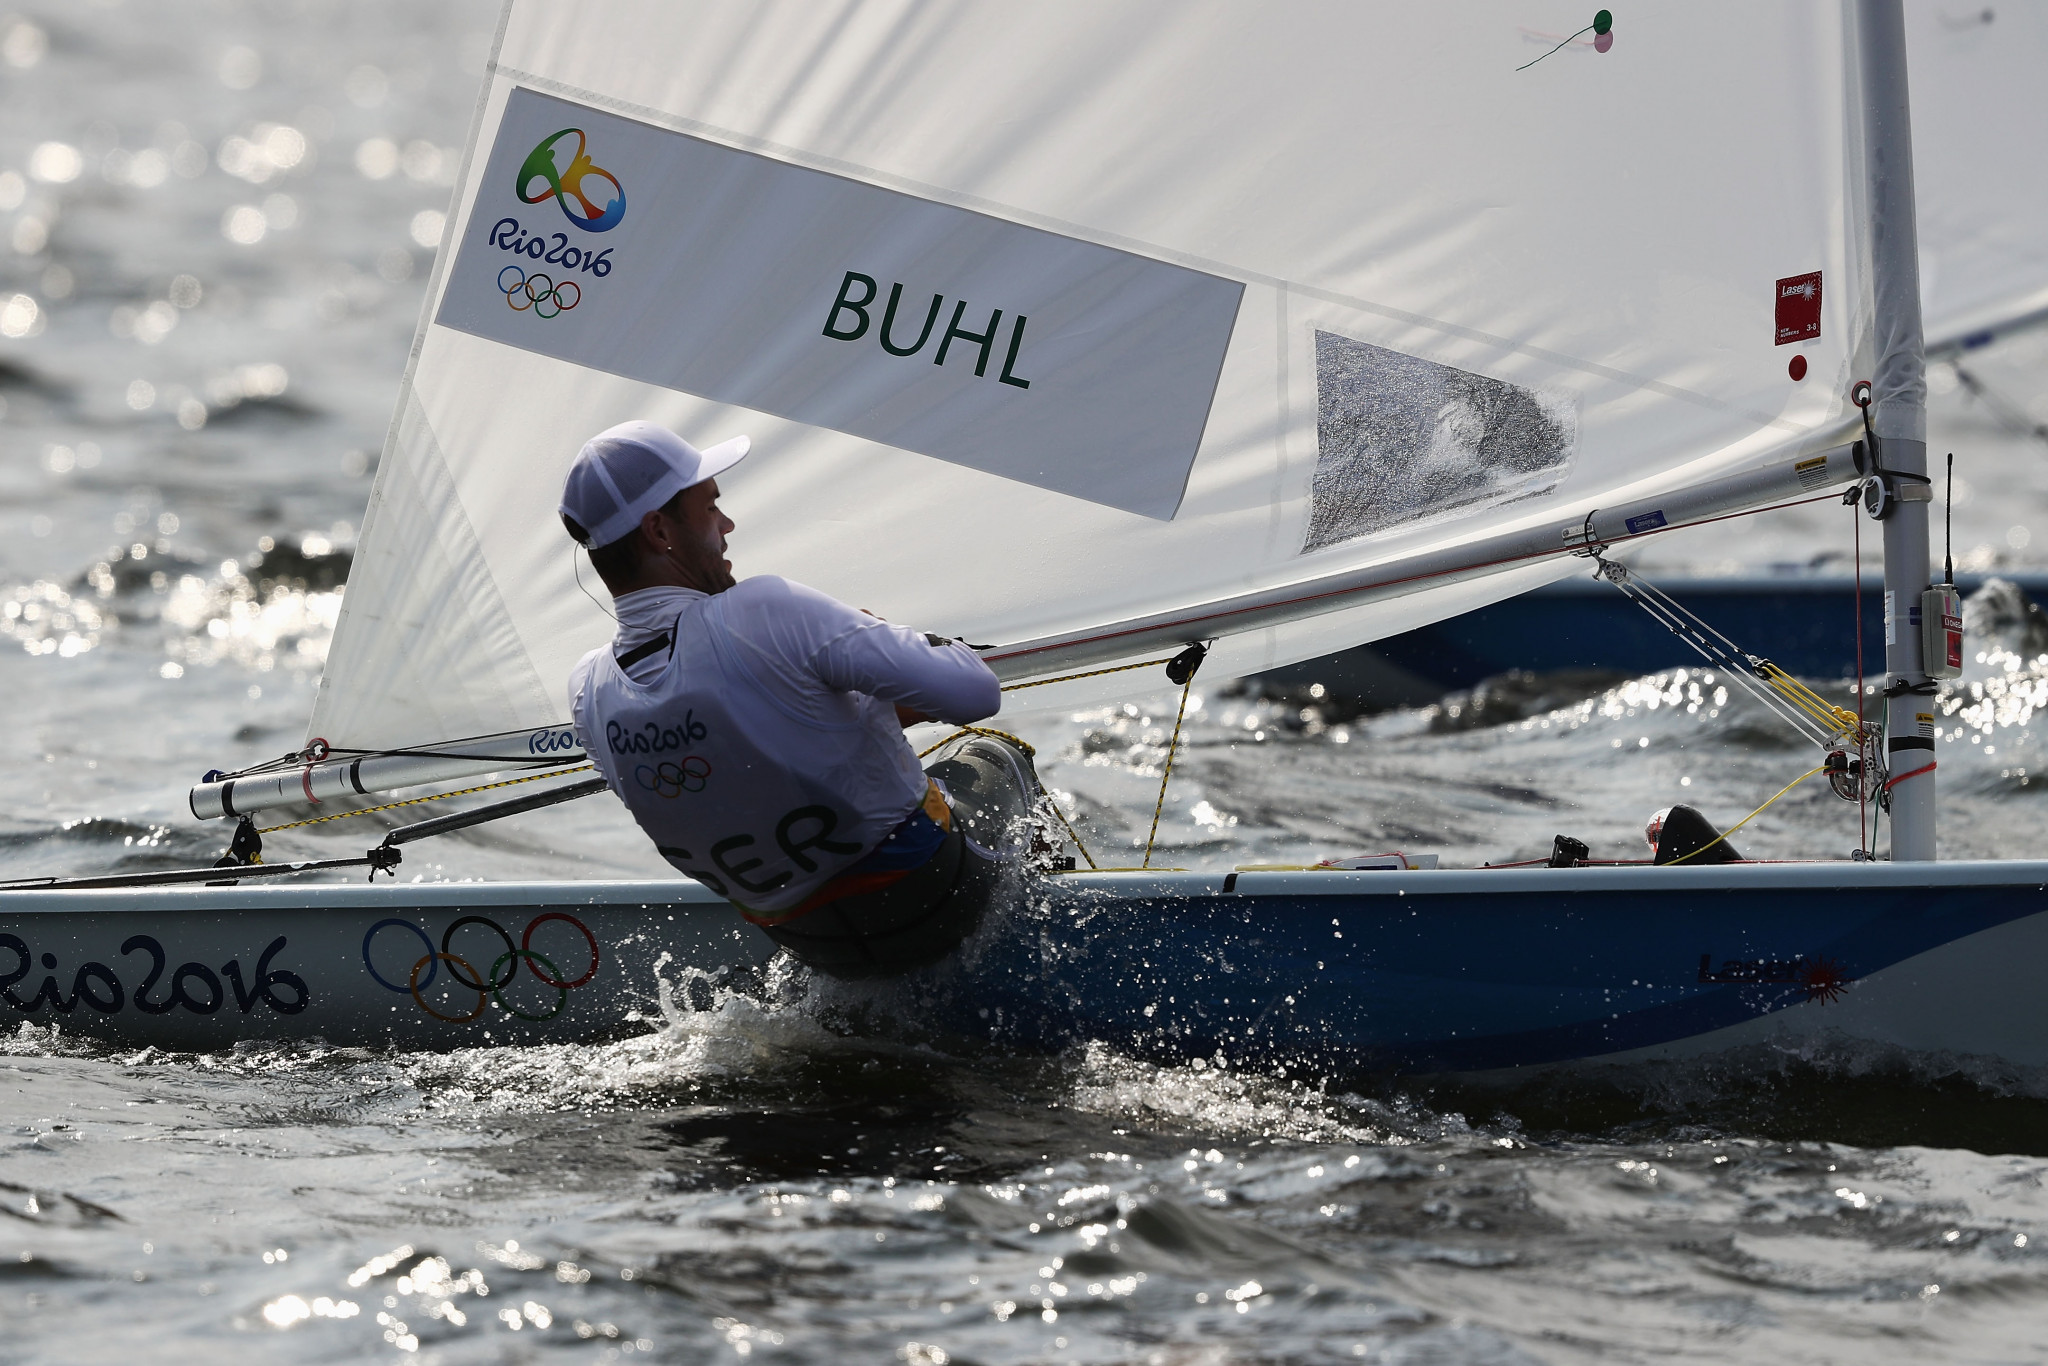 Buhl and Bernaz hit the front at Laser Standard World Championships